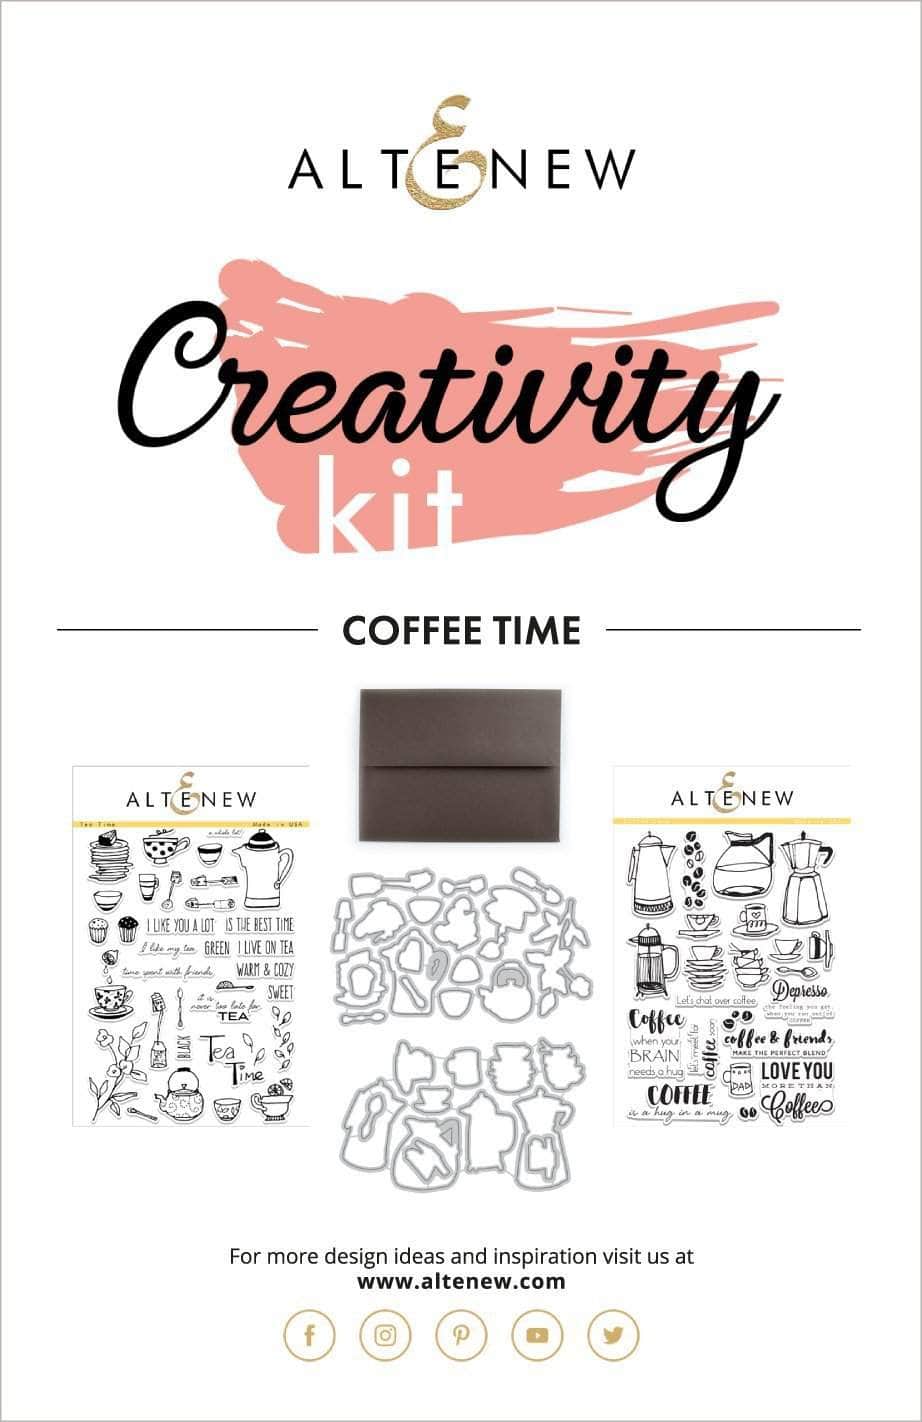 Printed Media Coffee Time Creativity Kit Inspiration Guide